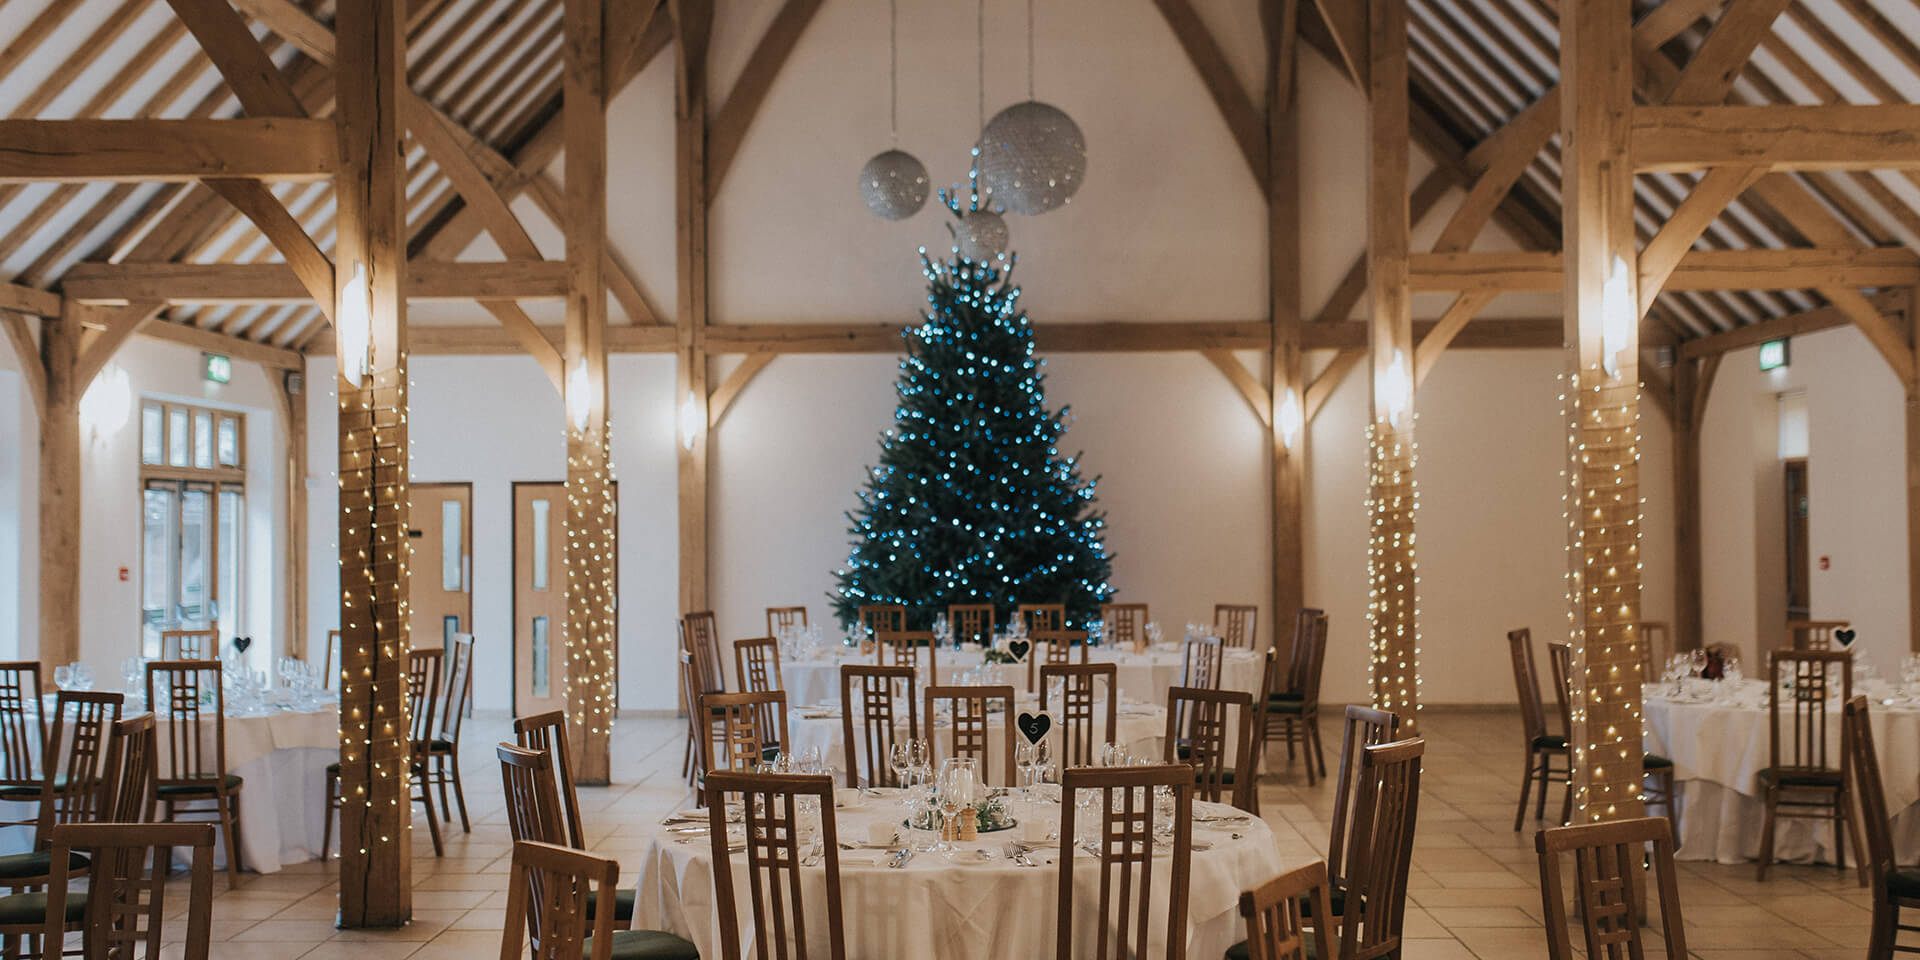 A Christmas tree in the Dining Barn makes it the perfect setting for a winter wedding